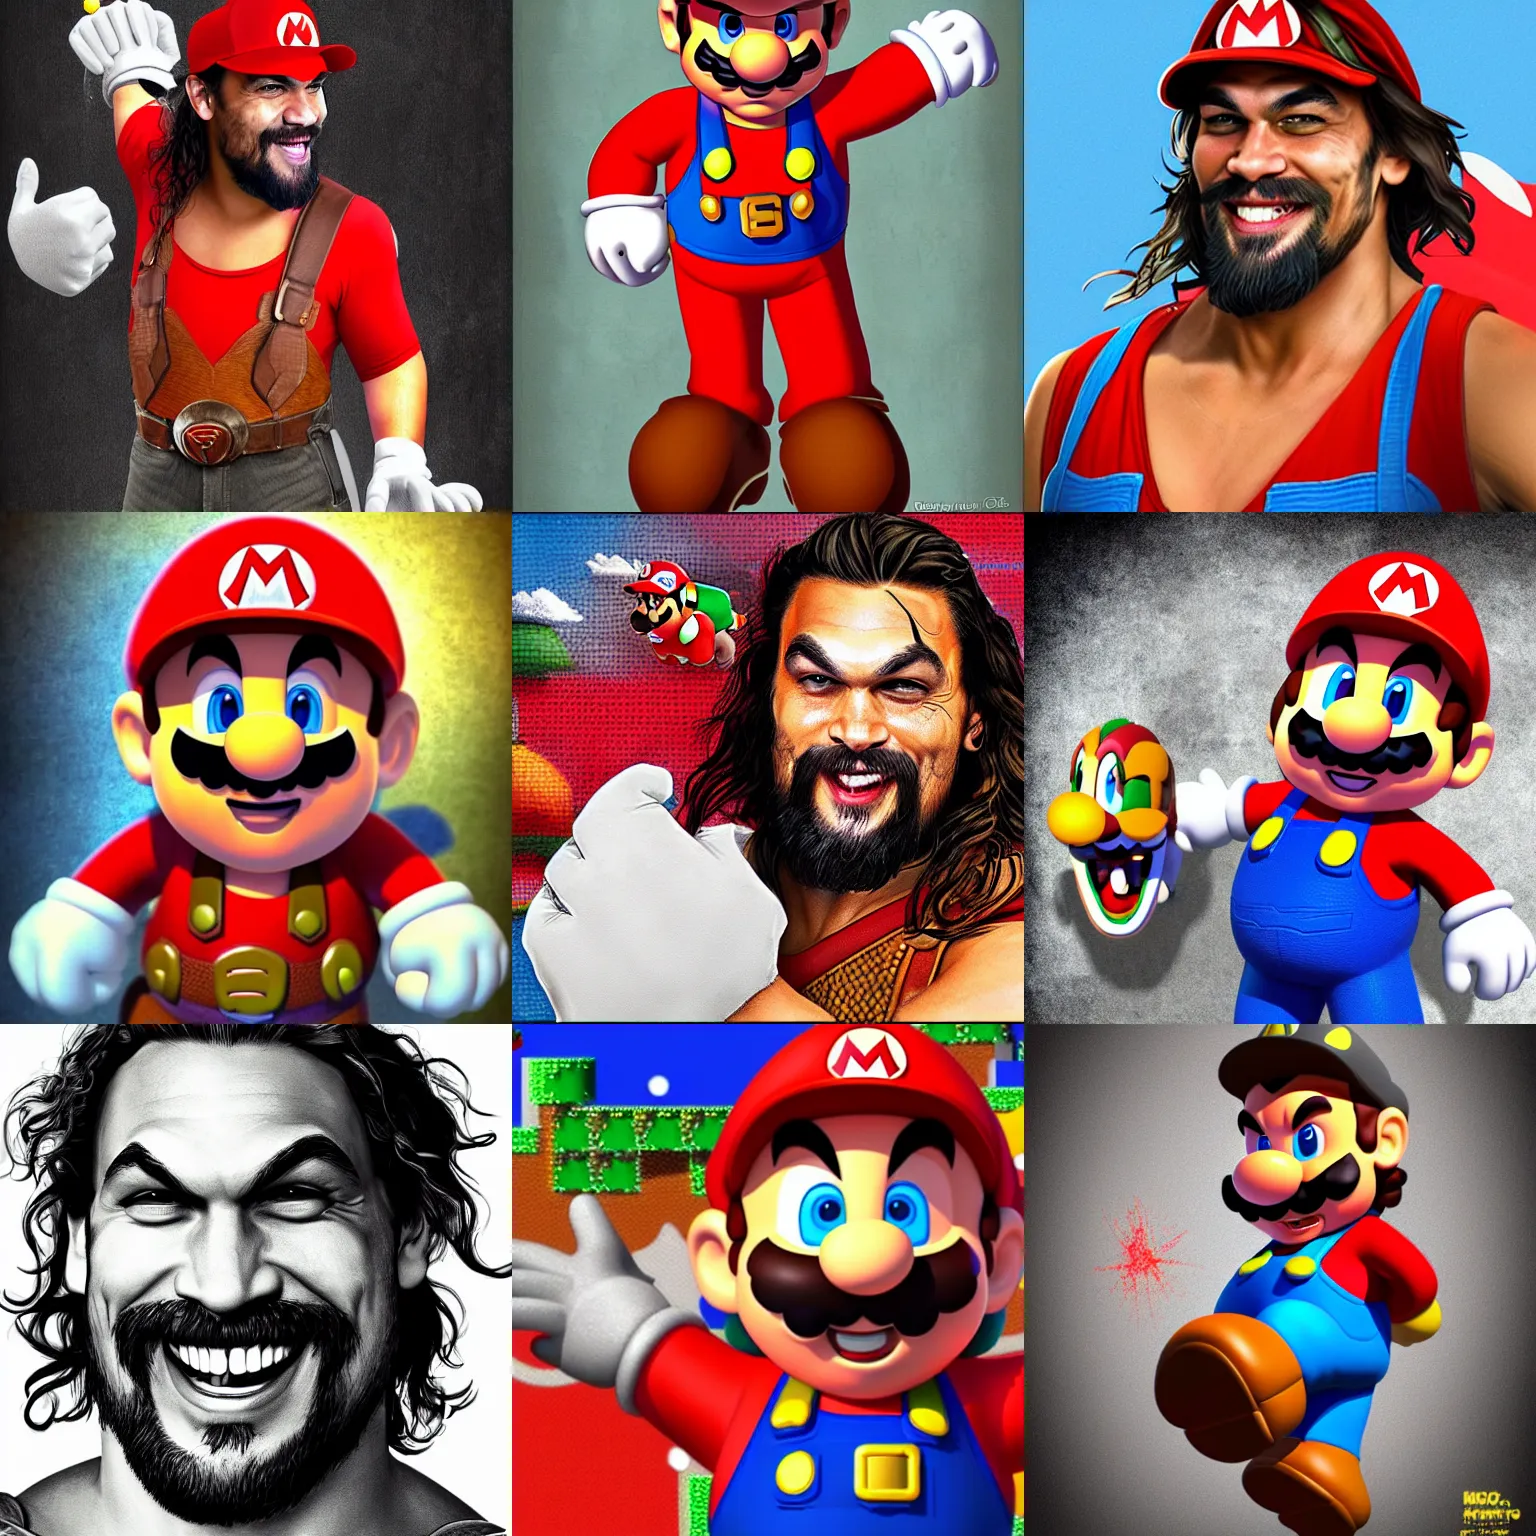 Prompt: Jason Momoa as Super Mario with a huge grin, highly detailed digital art